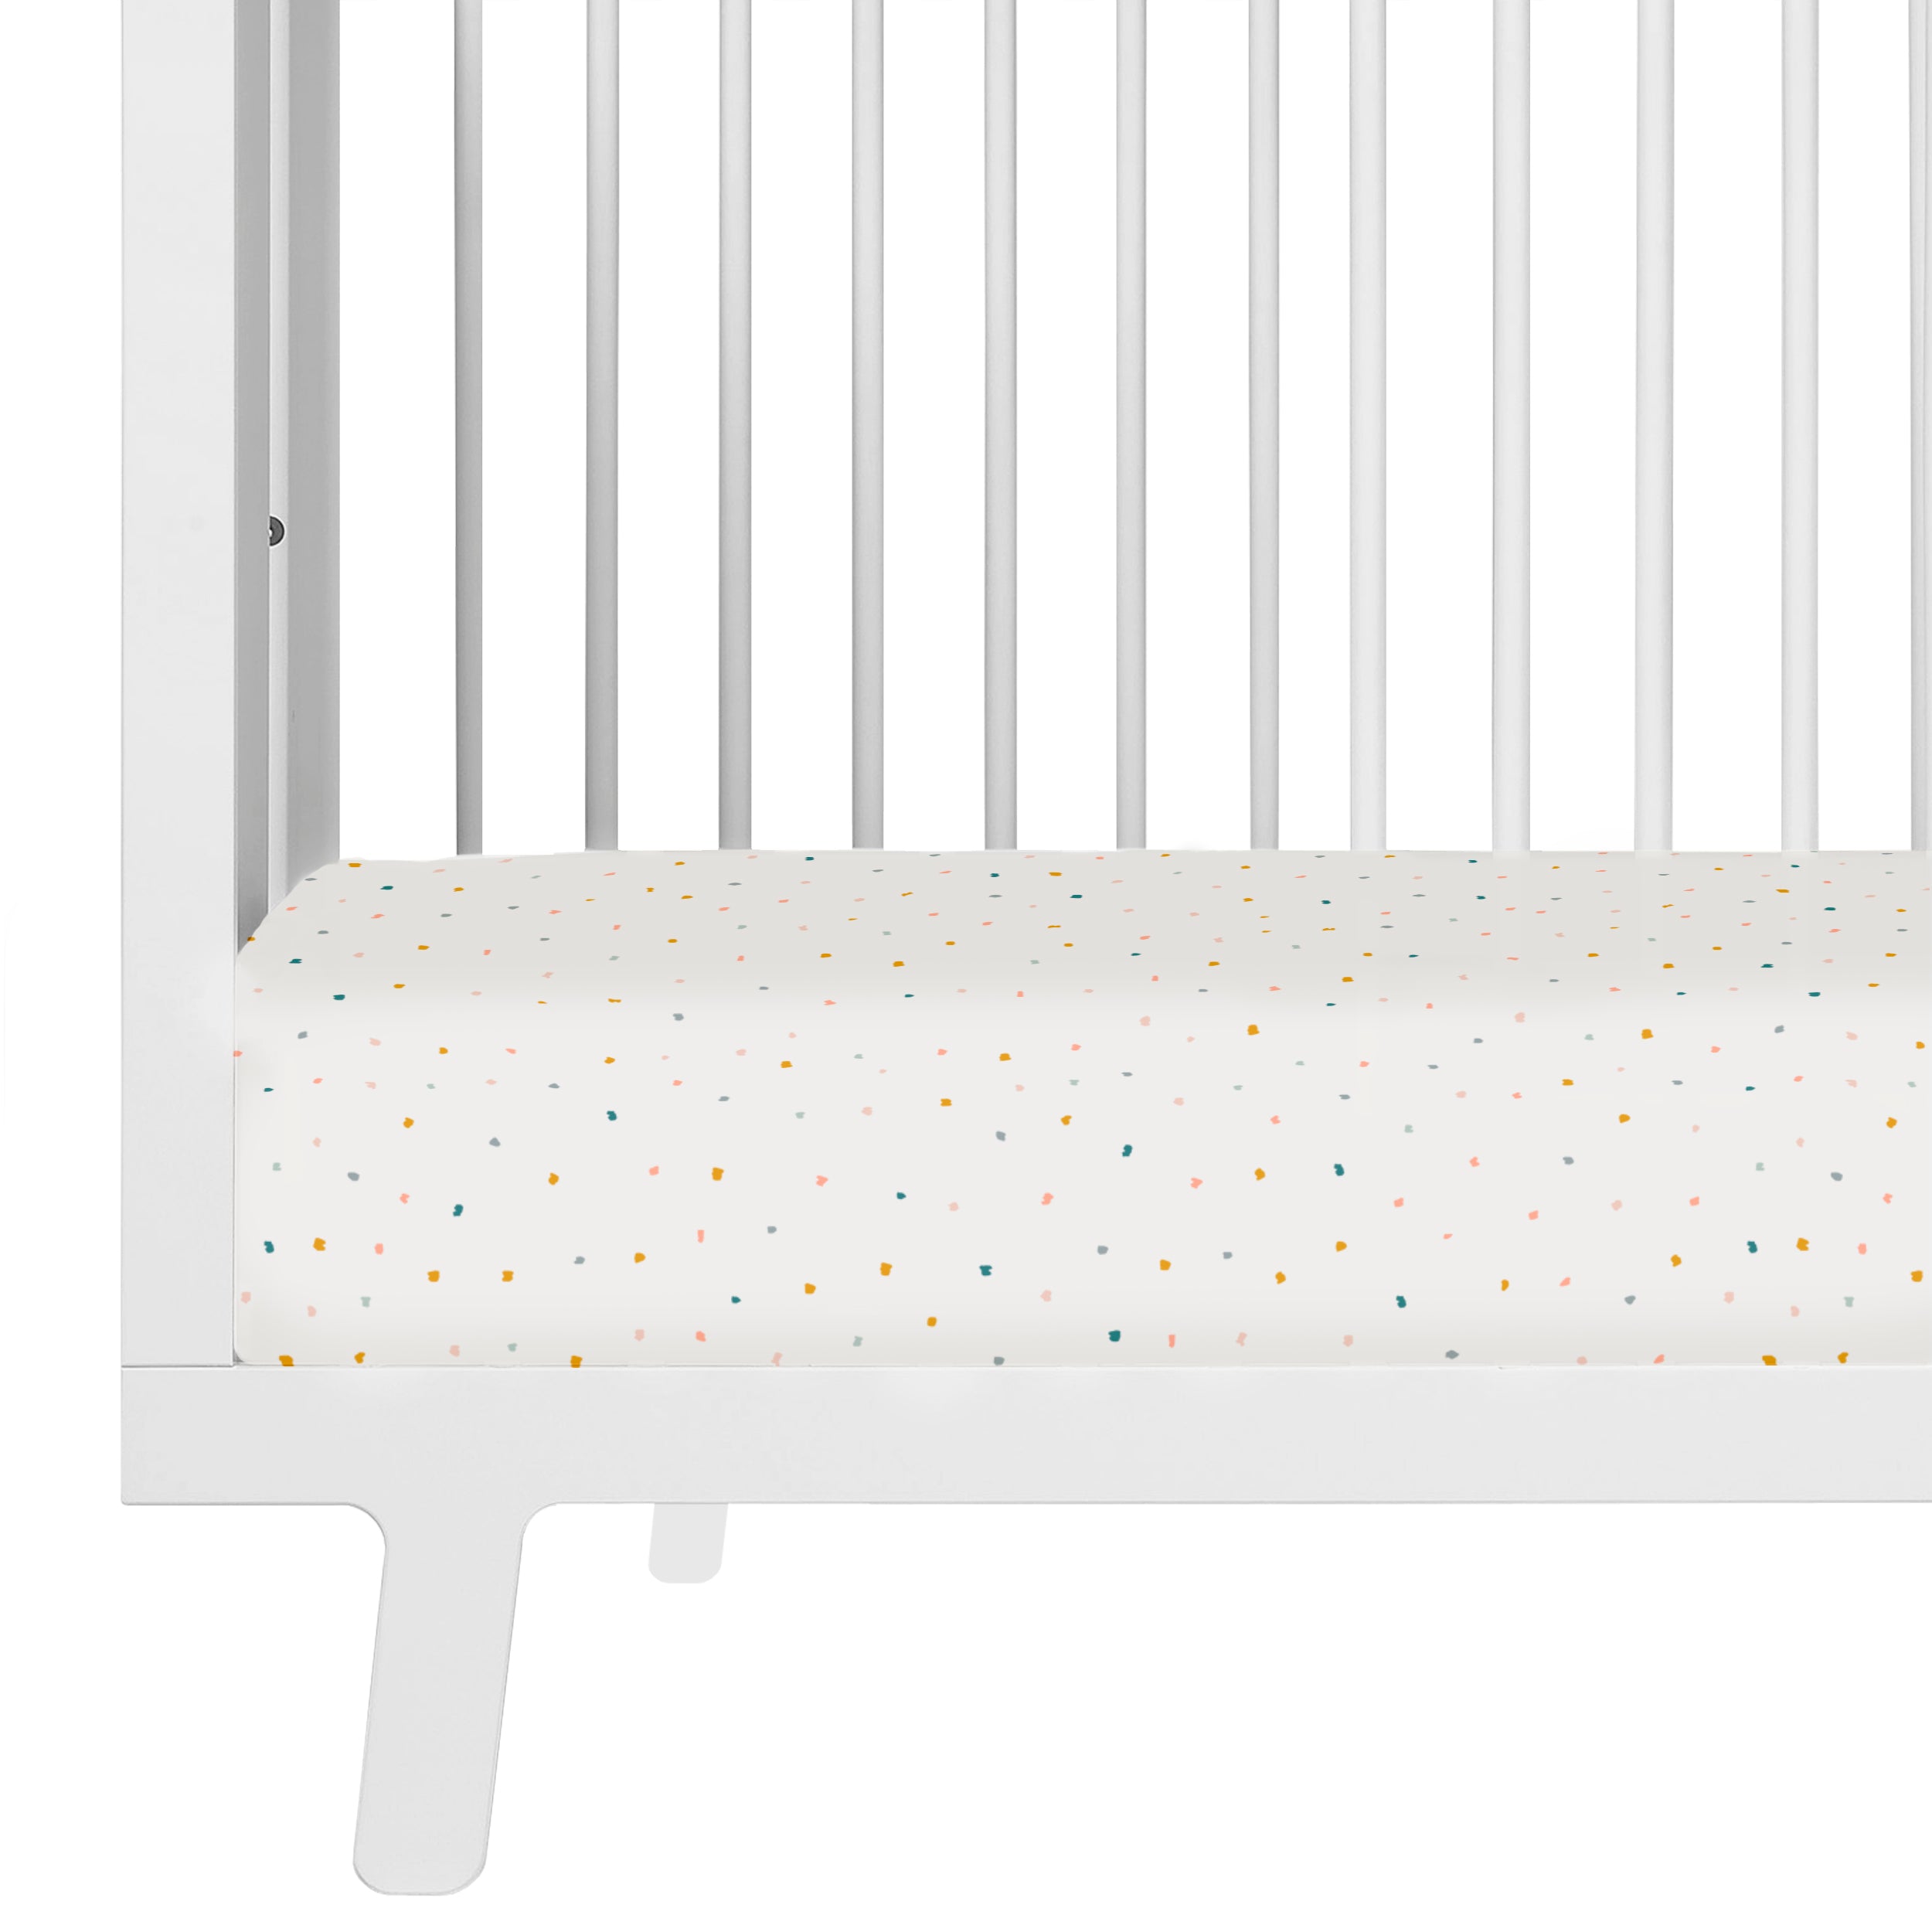 A close-up of a white crib with a mattress covered in a Dotty crib fitted sheet with pillowcase by Makemake Organics, featuring a multicolored pattern. The crib has vertical bars and a simple modern design.